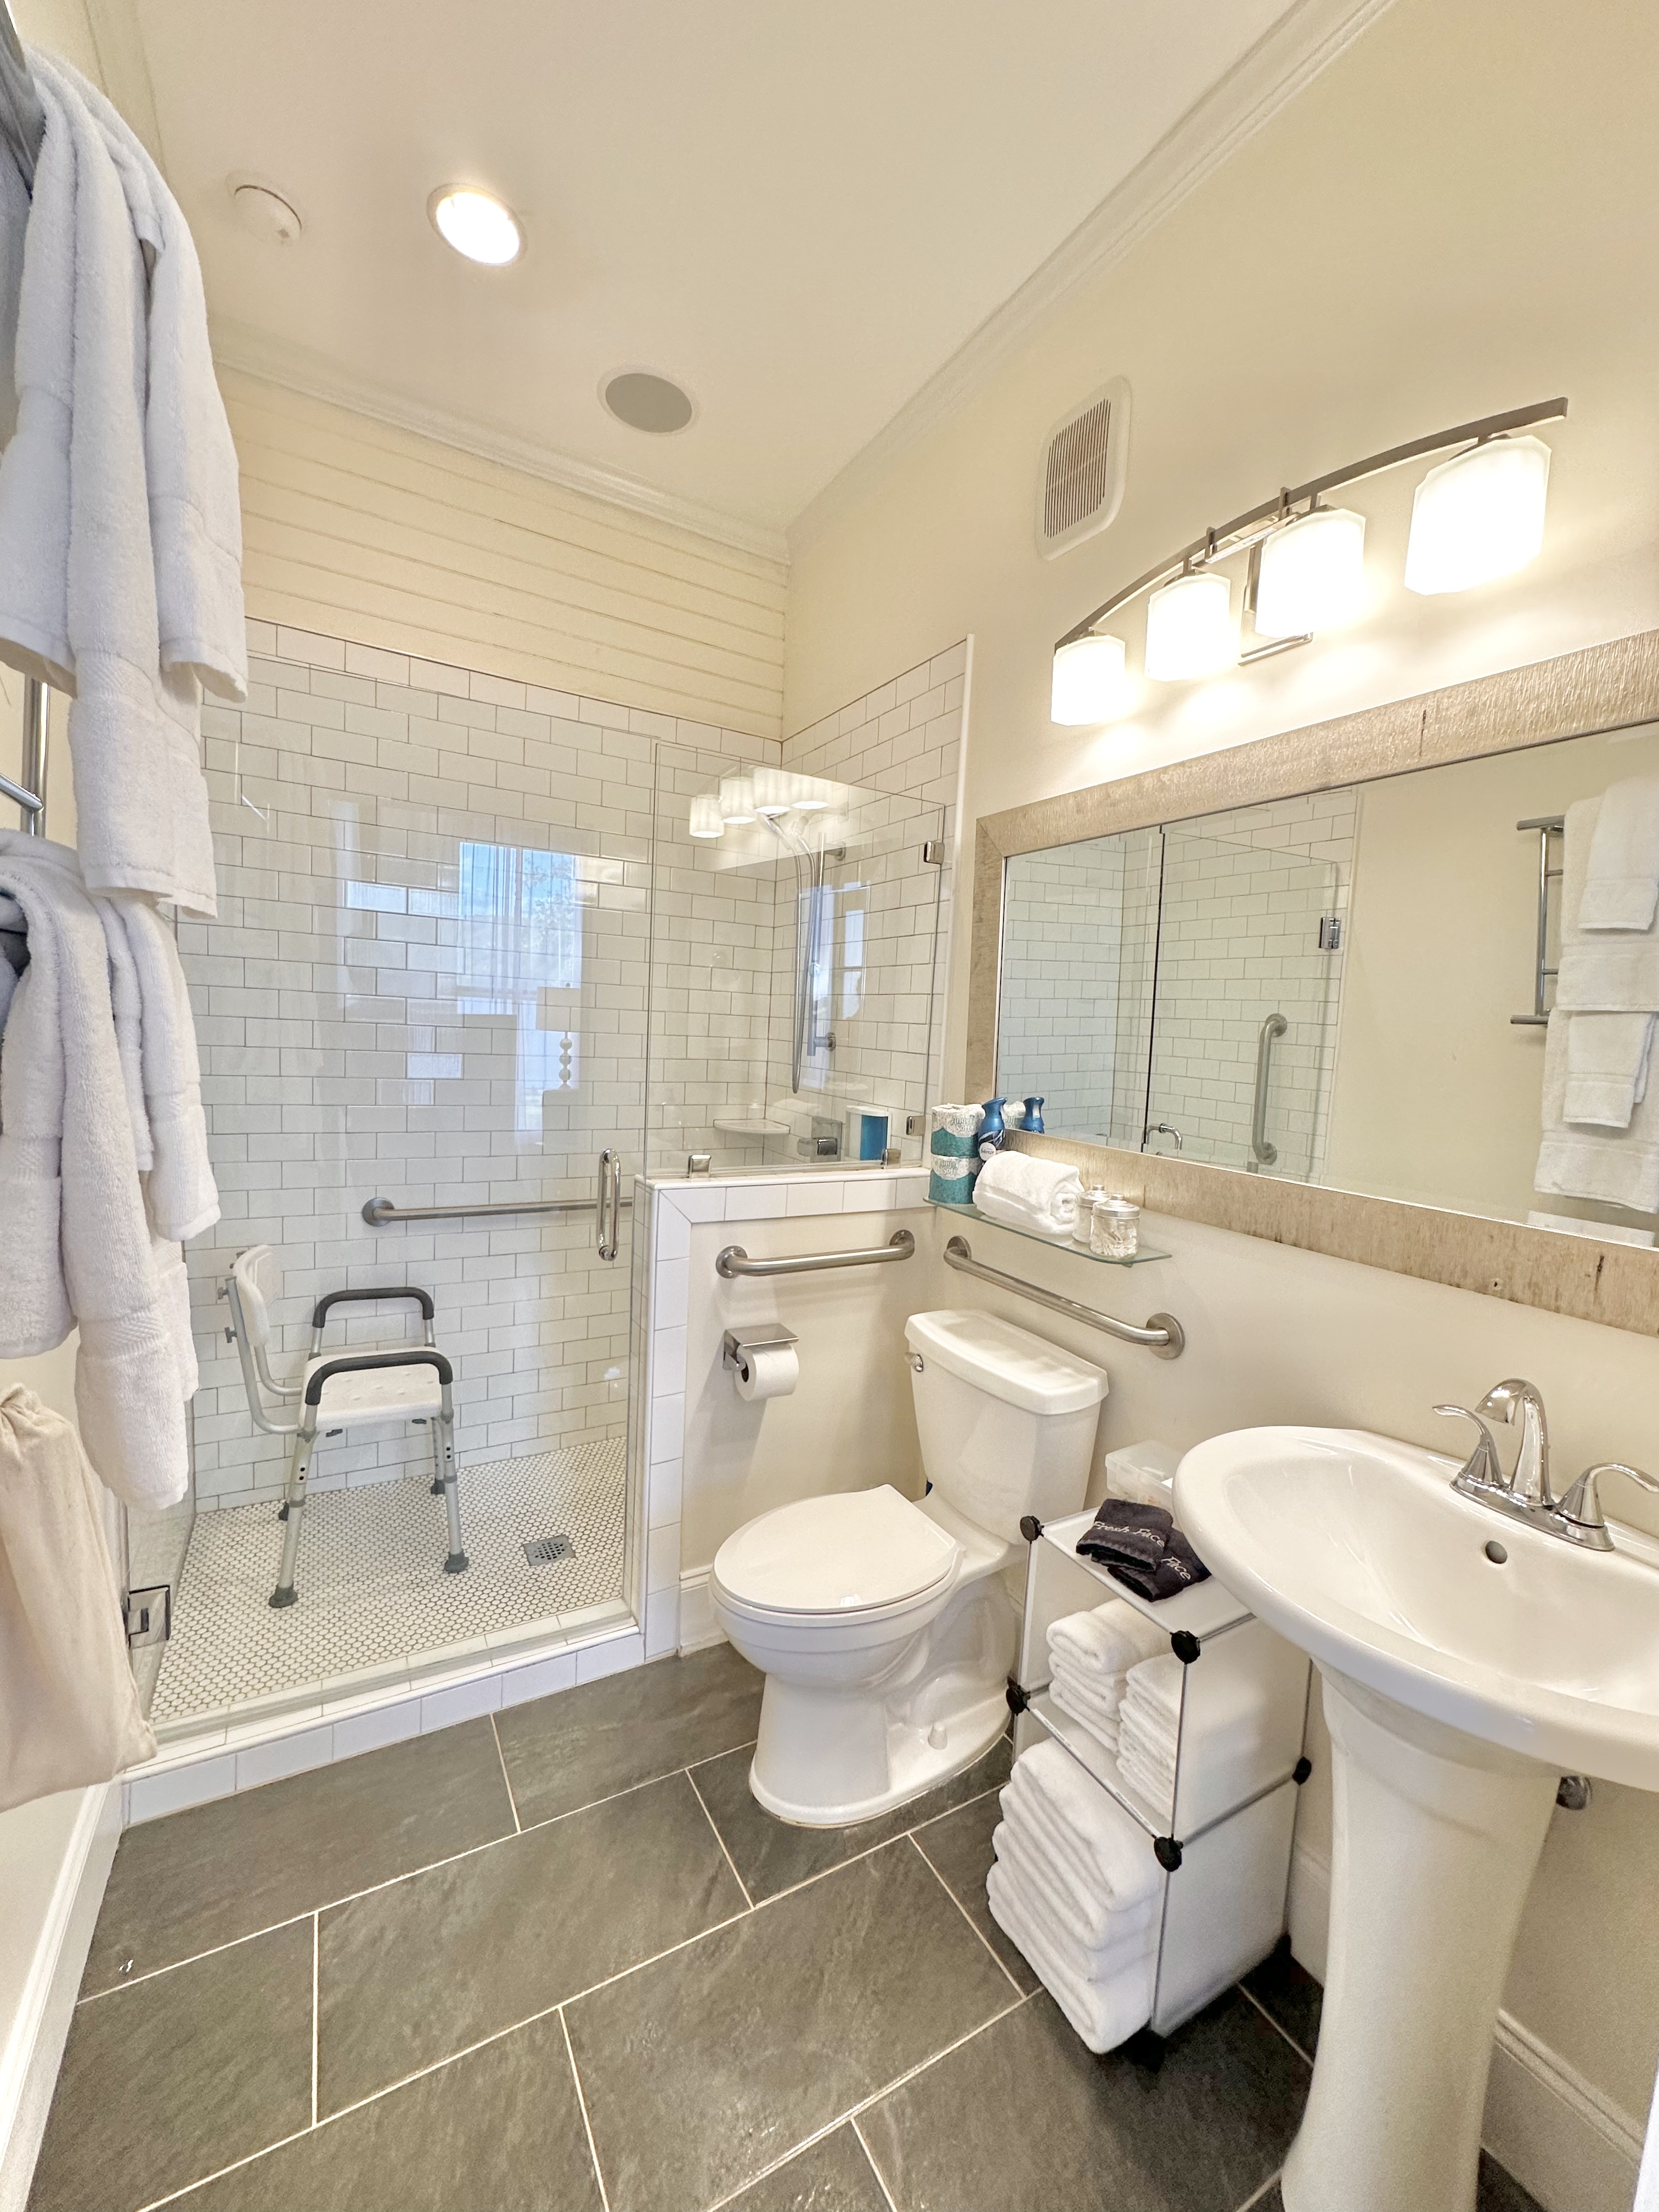 The Brown Room enSuite-Main Level. Wide door, ADA shower chair, and hand rails.